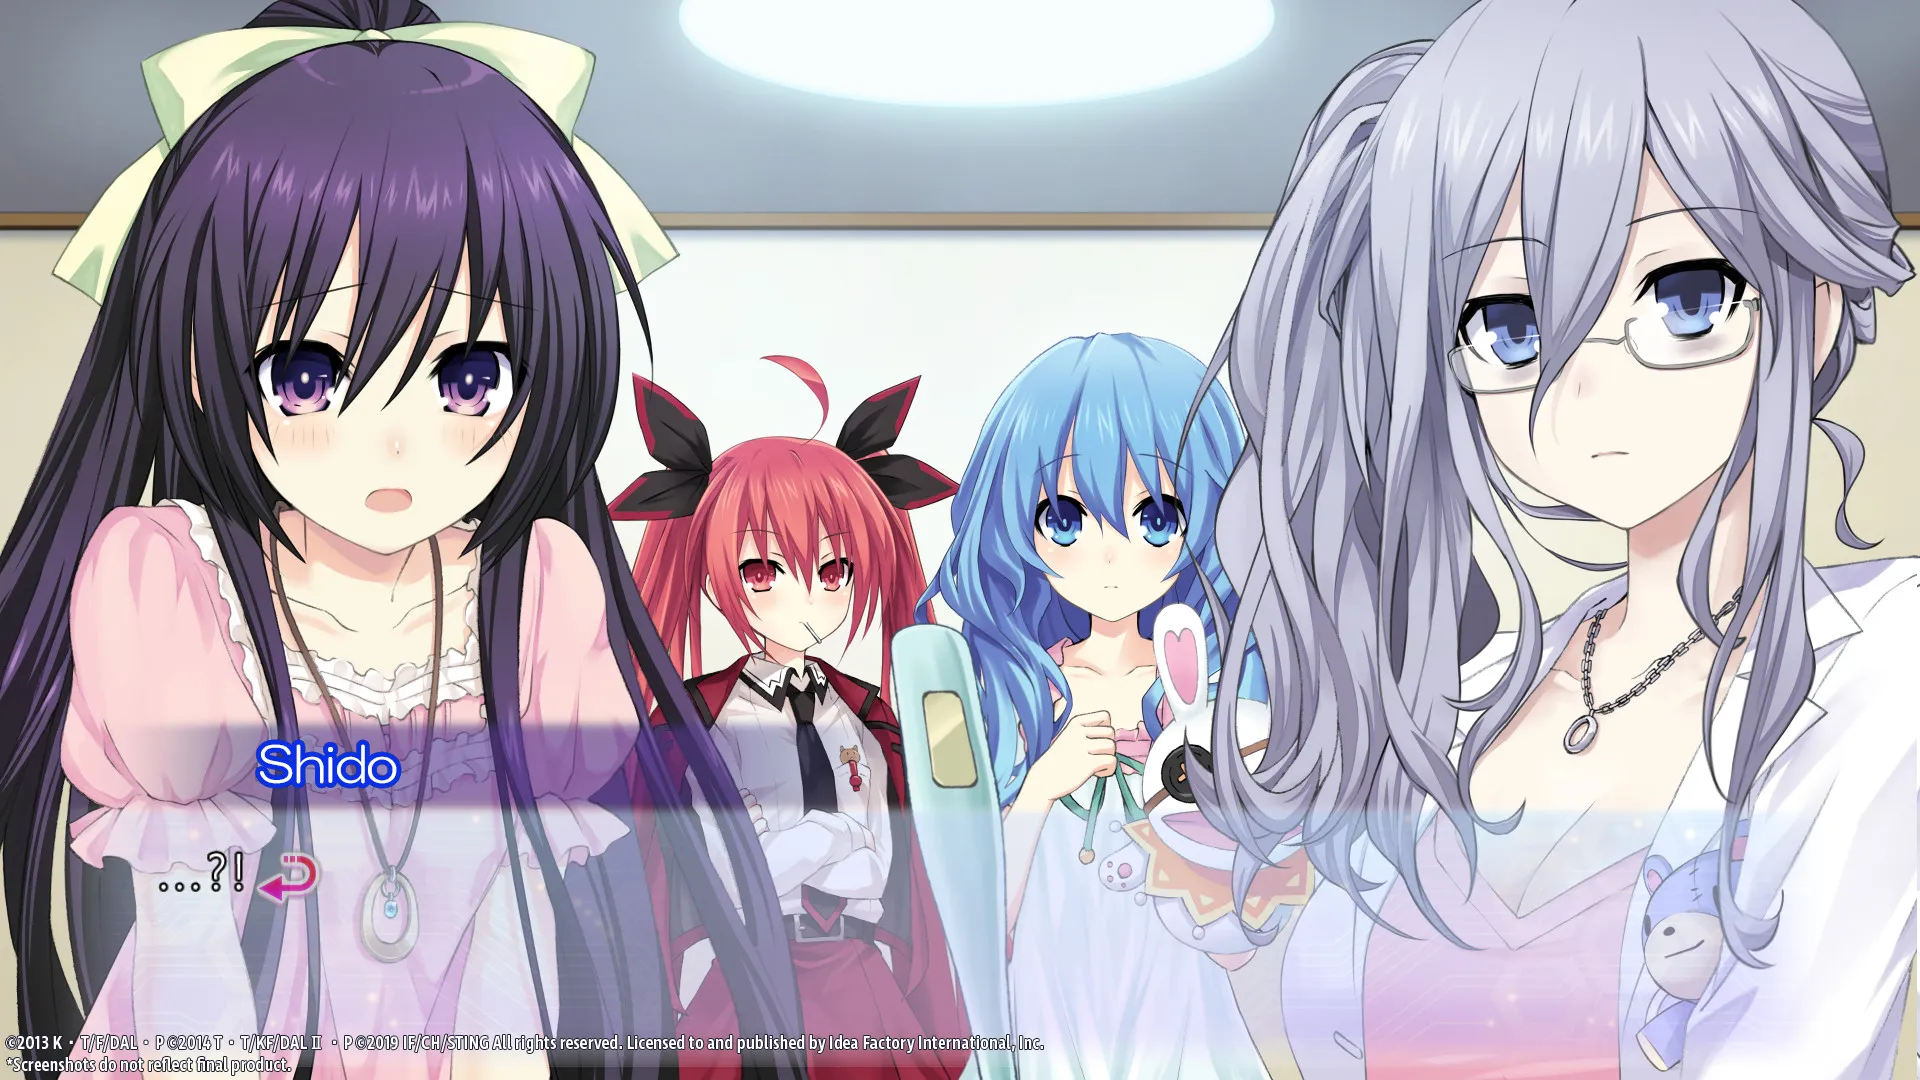 Date A Live IV Anime Will Continue the Story of Shido and the Spirits